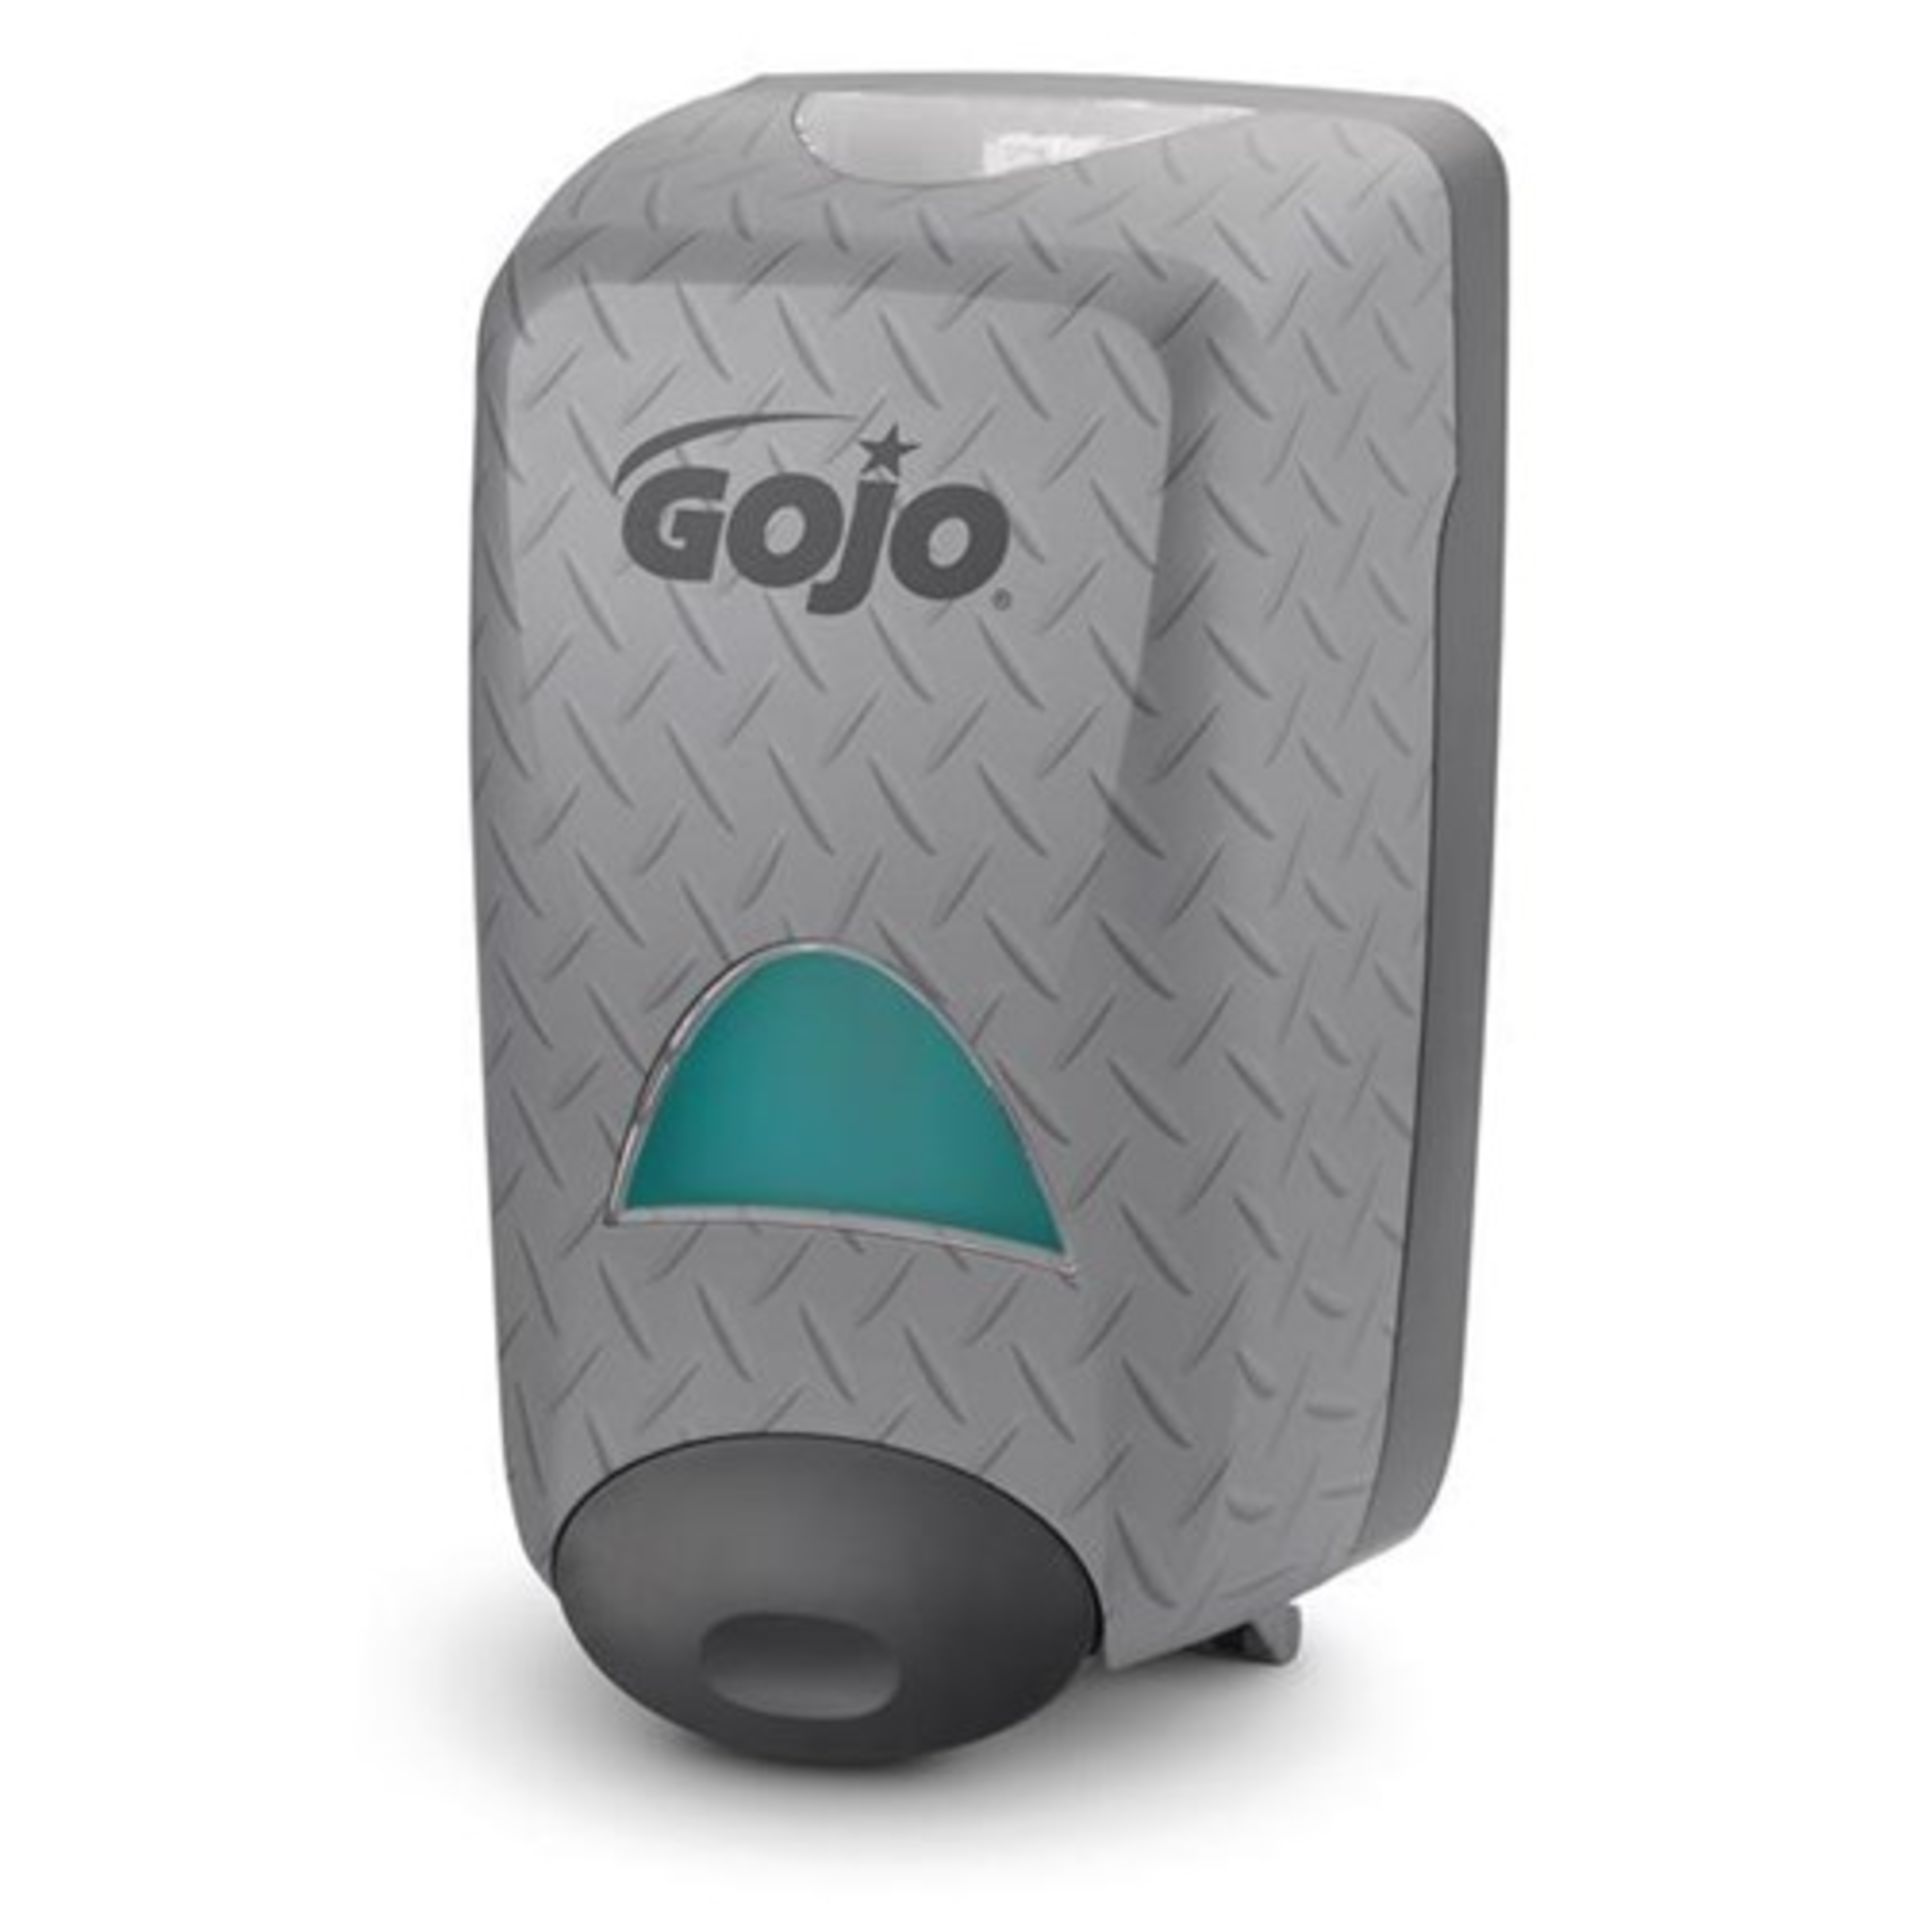 V Brand New A Lot Of Six Gojo DPX Two Litre Foam Soap Dispensers £2.85 Each (Paperstone)